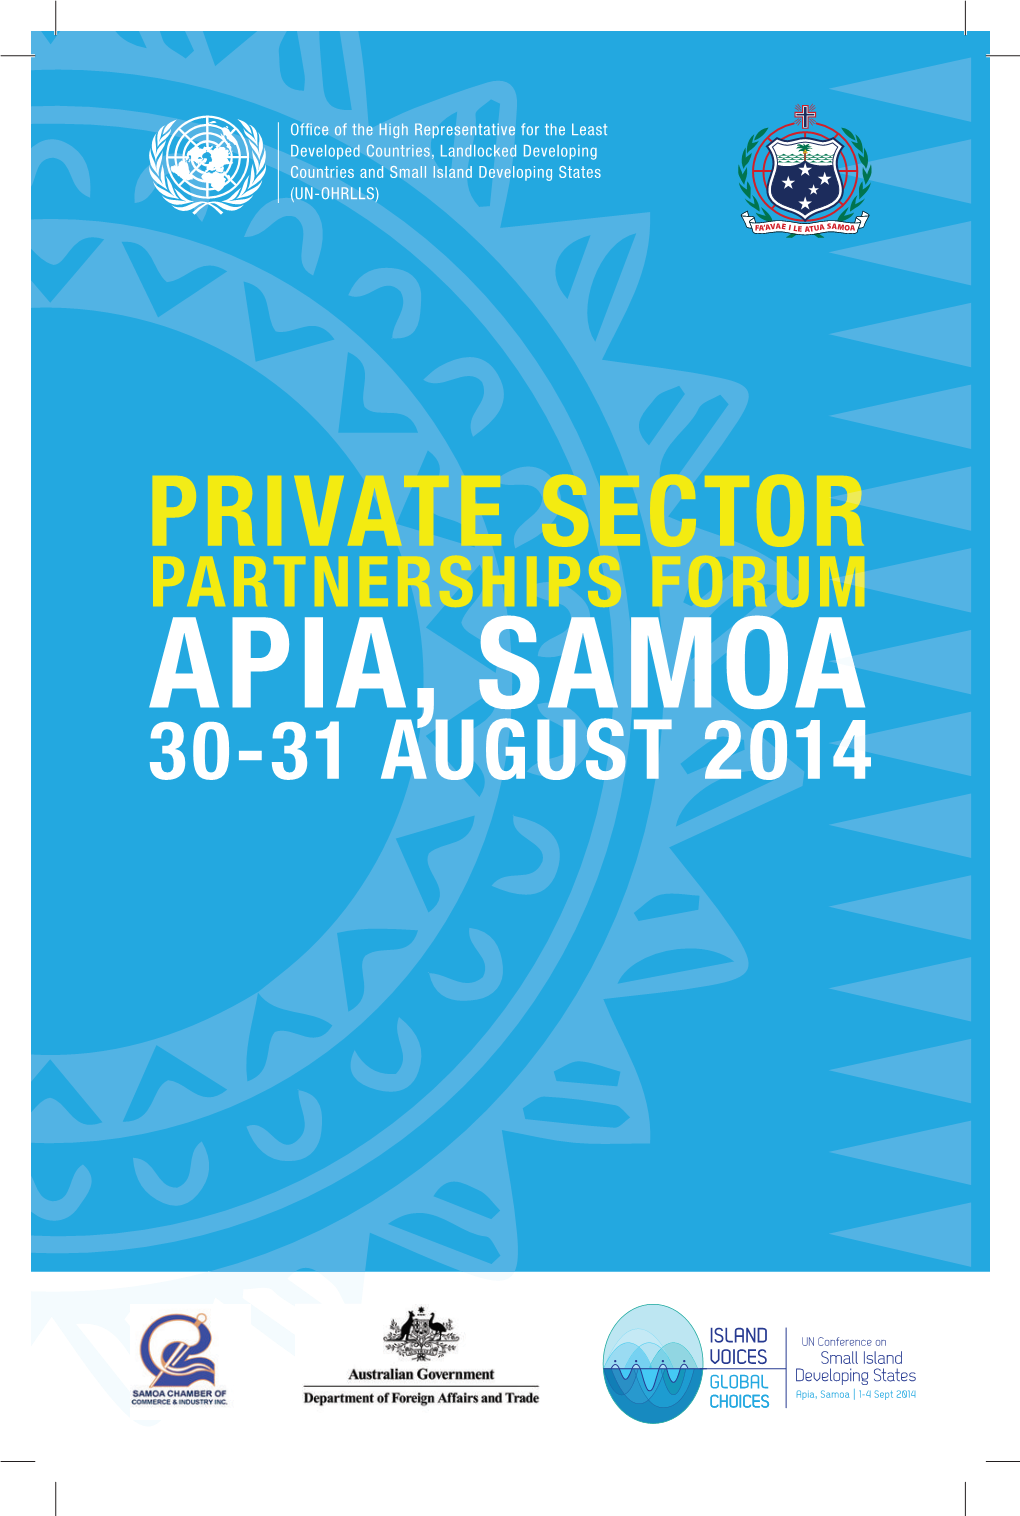 Programme of Private Sector Forum